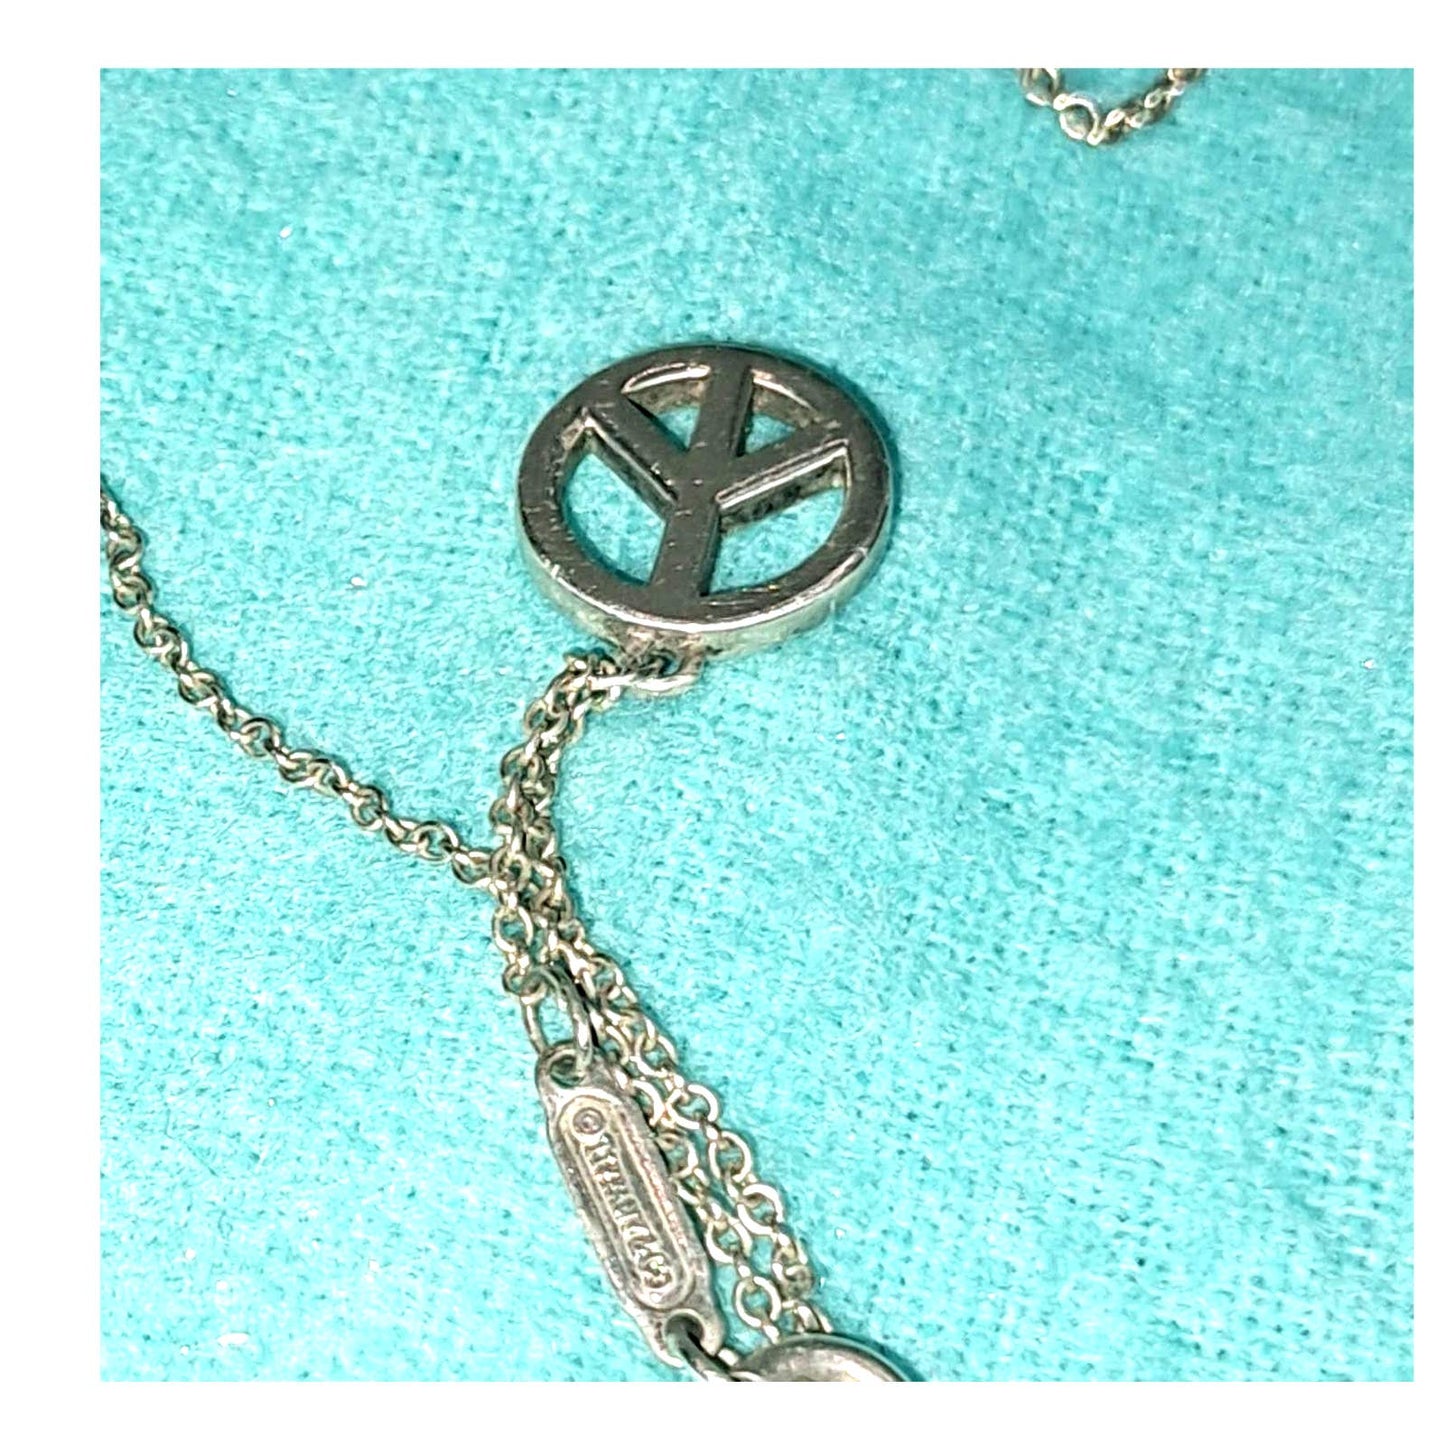 Tiffany PEACE SIGNS Bracelet & Necklace-COA's & Cleaning Tiffany Receipts